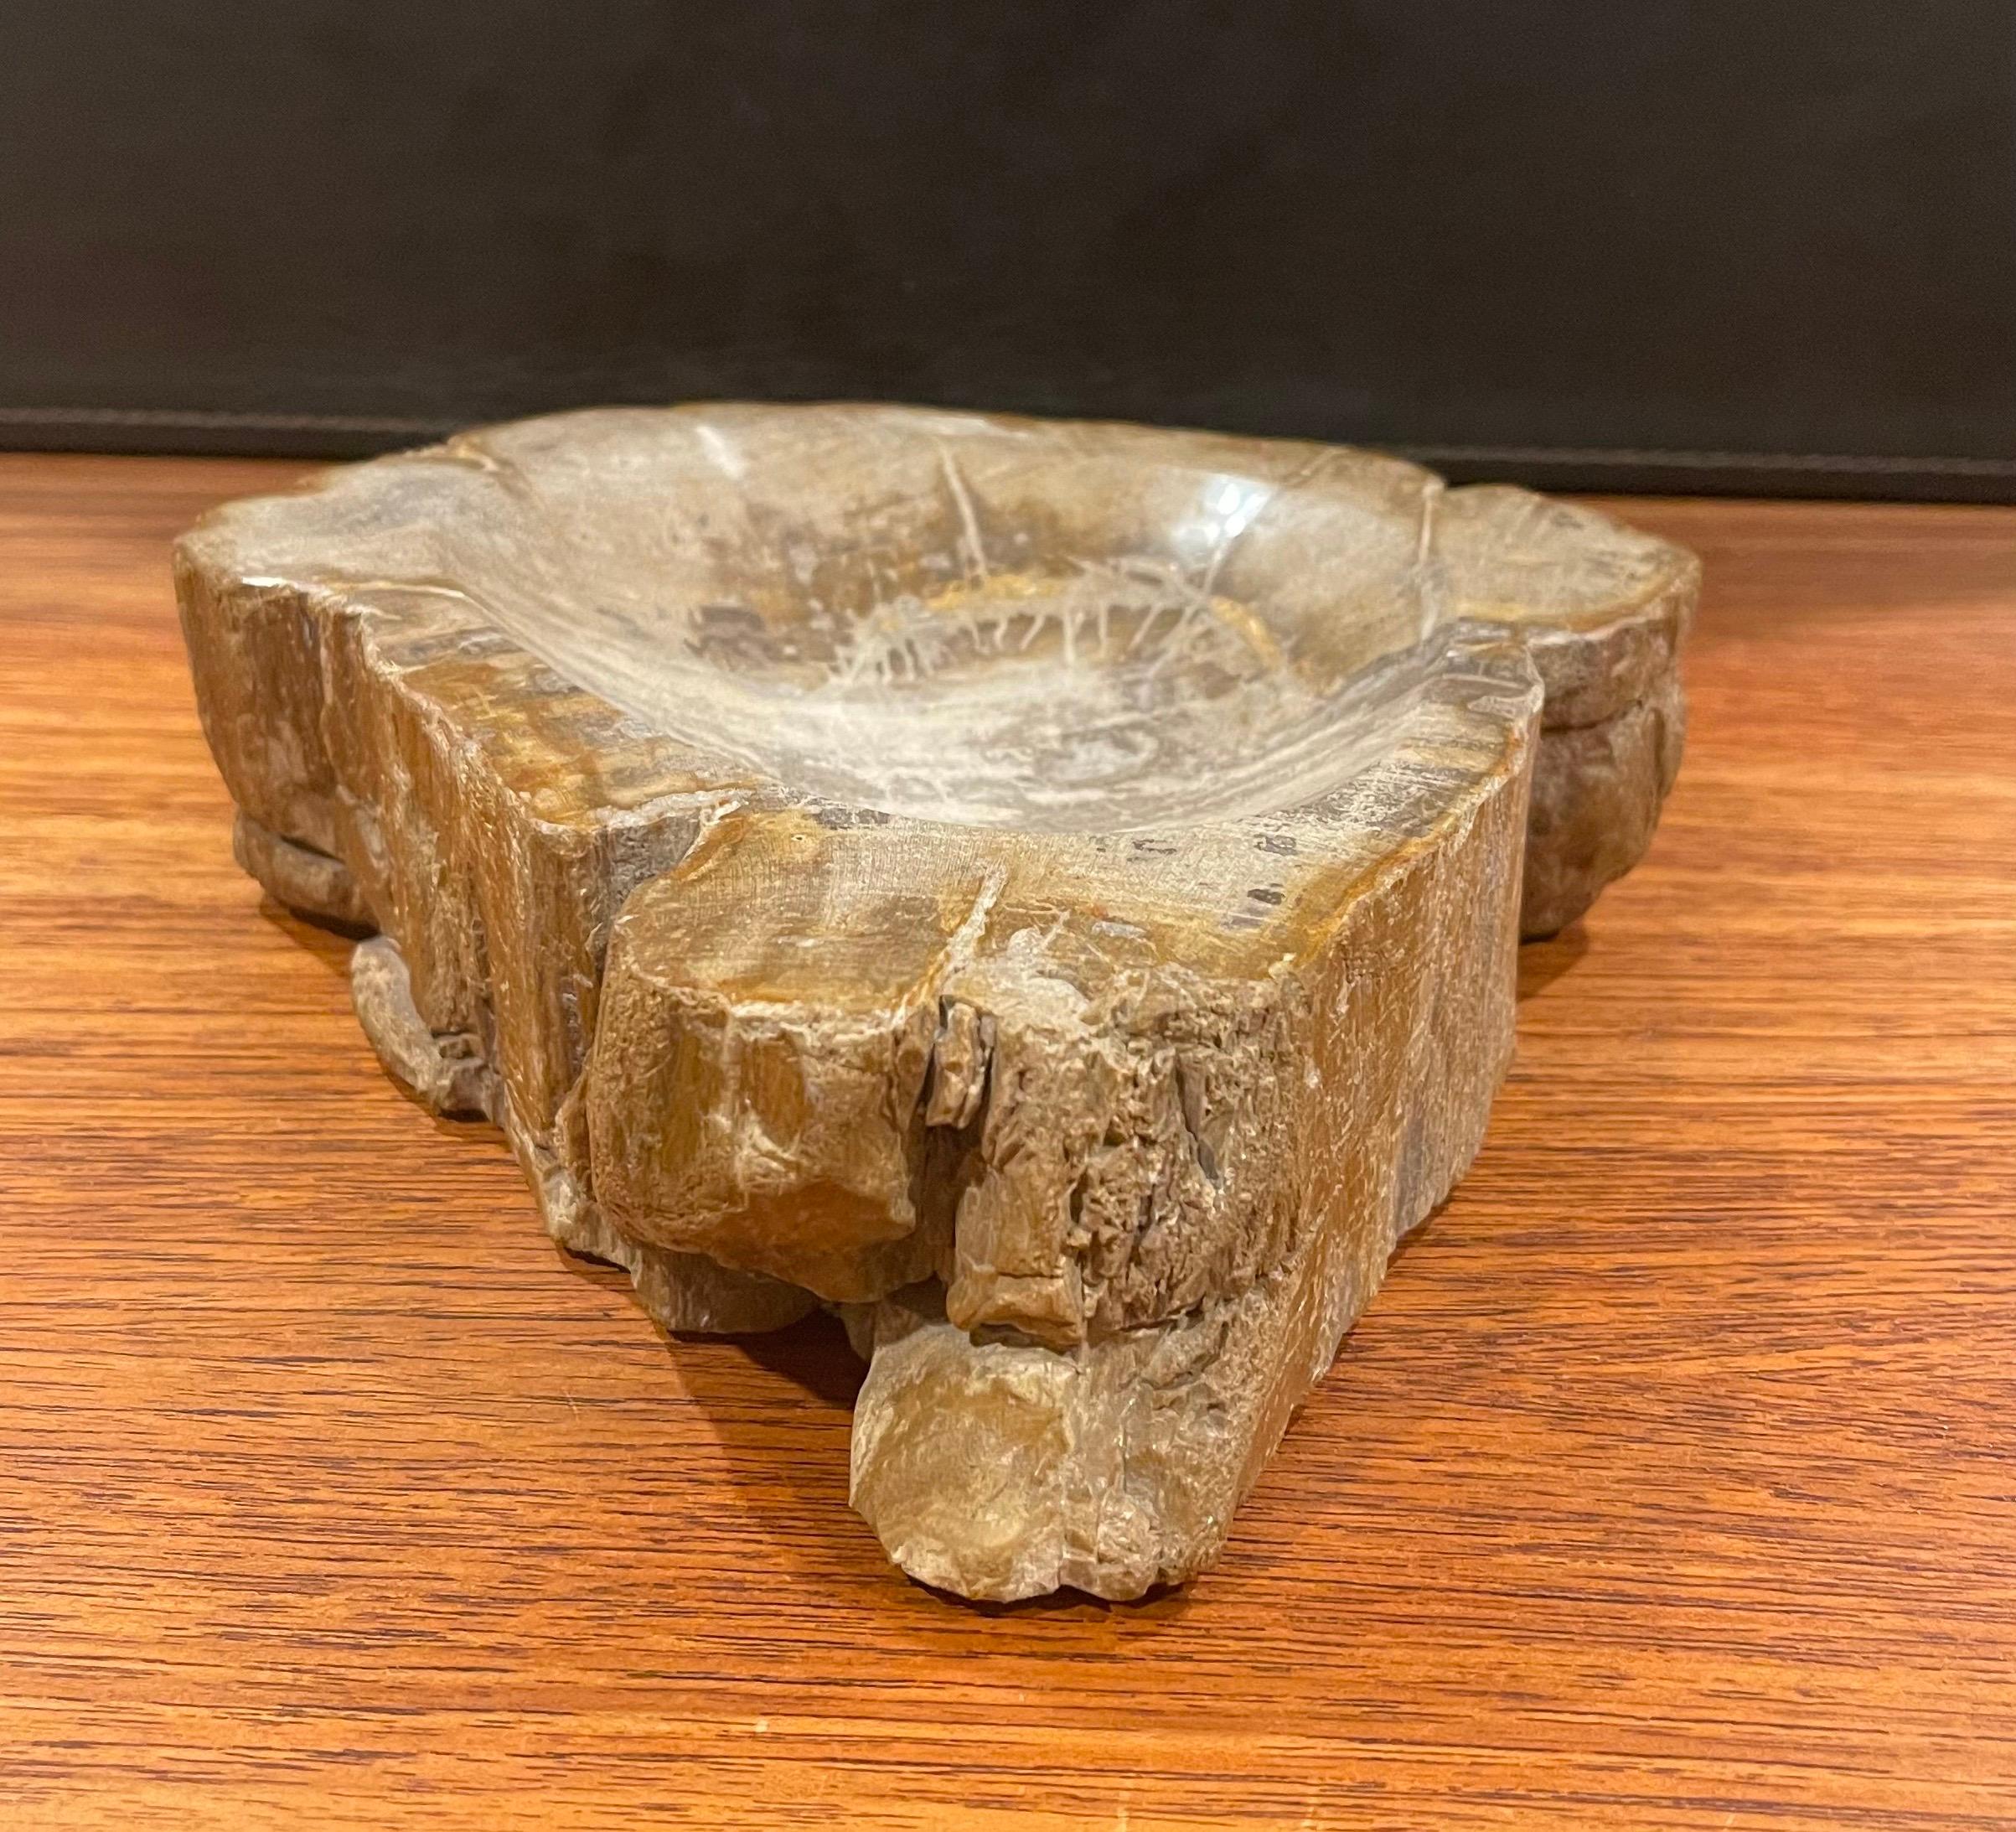 A very nice vintage petrified wood bowl / ashtray, circa 1960s. The piece is in very good condition with wonderful brown and tan colors and measures 9.75